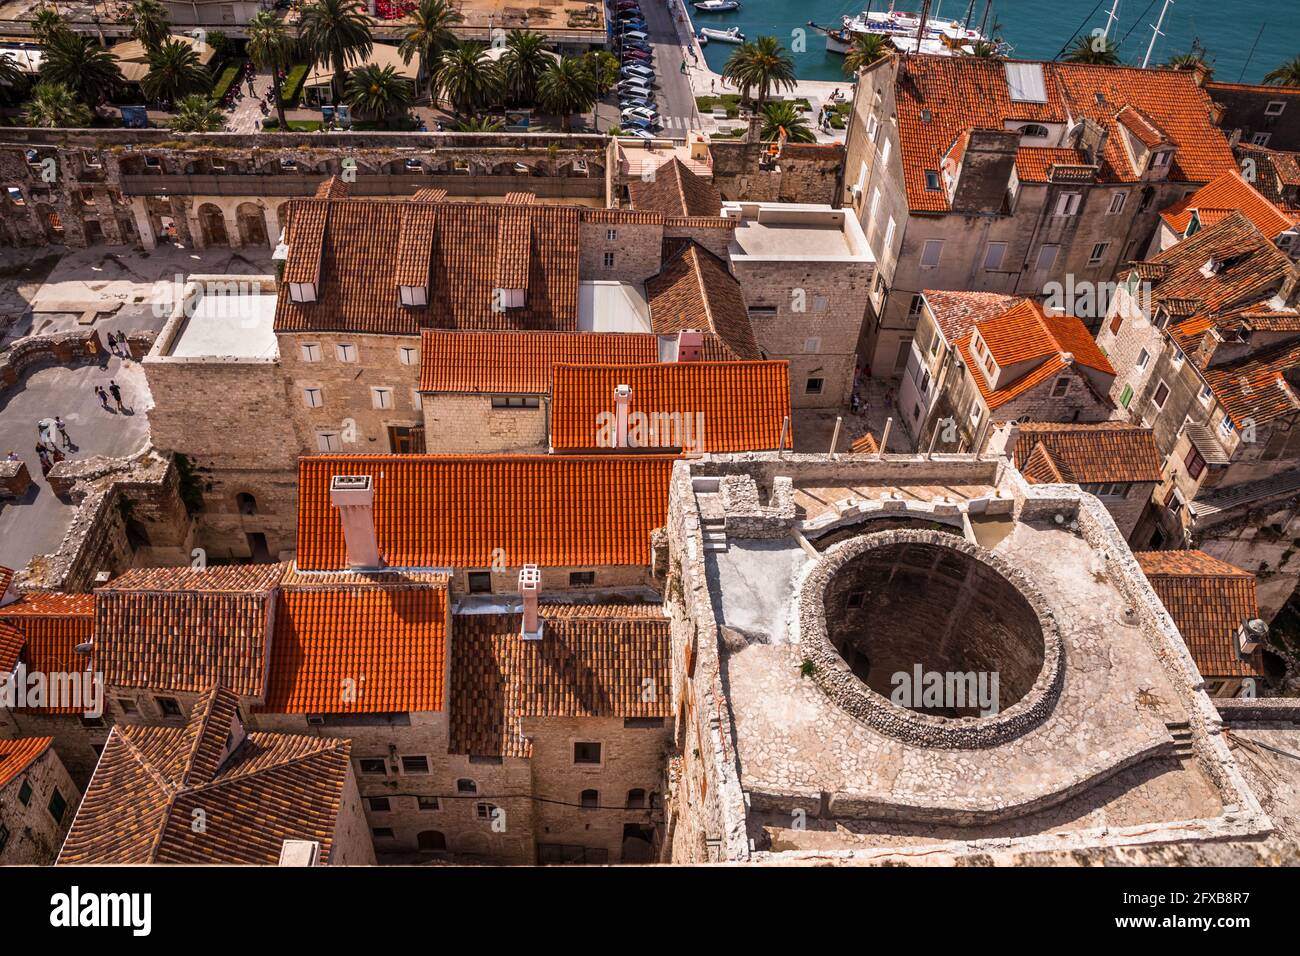 The Diocletian Palace in old town Split as seen from atop the bell tower of the Cathedral of Saint Domnius. Croatia Stock Photo